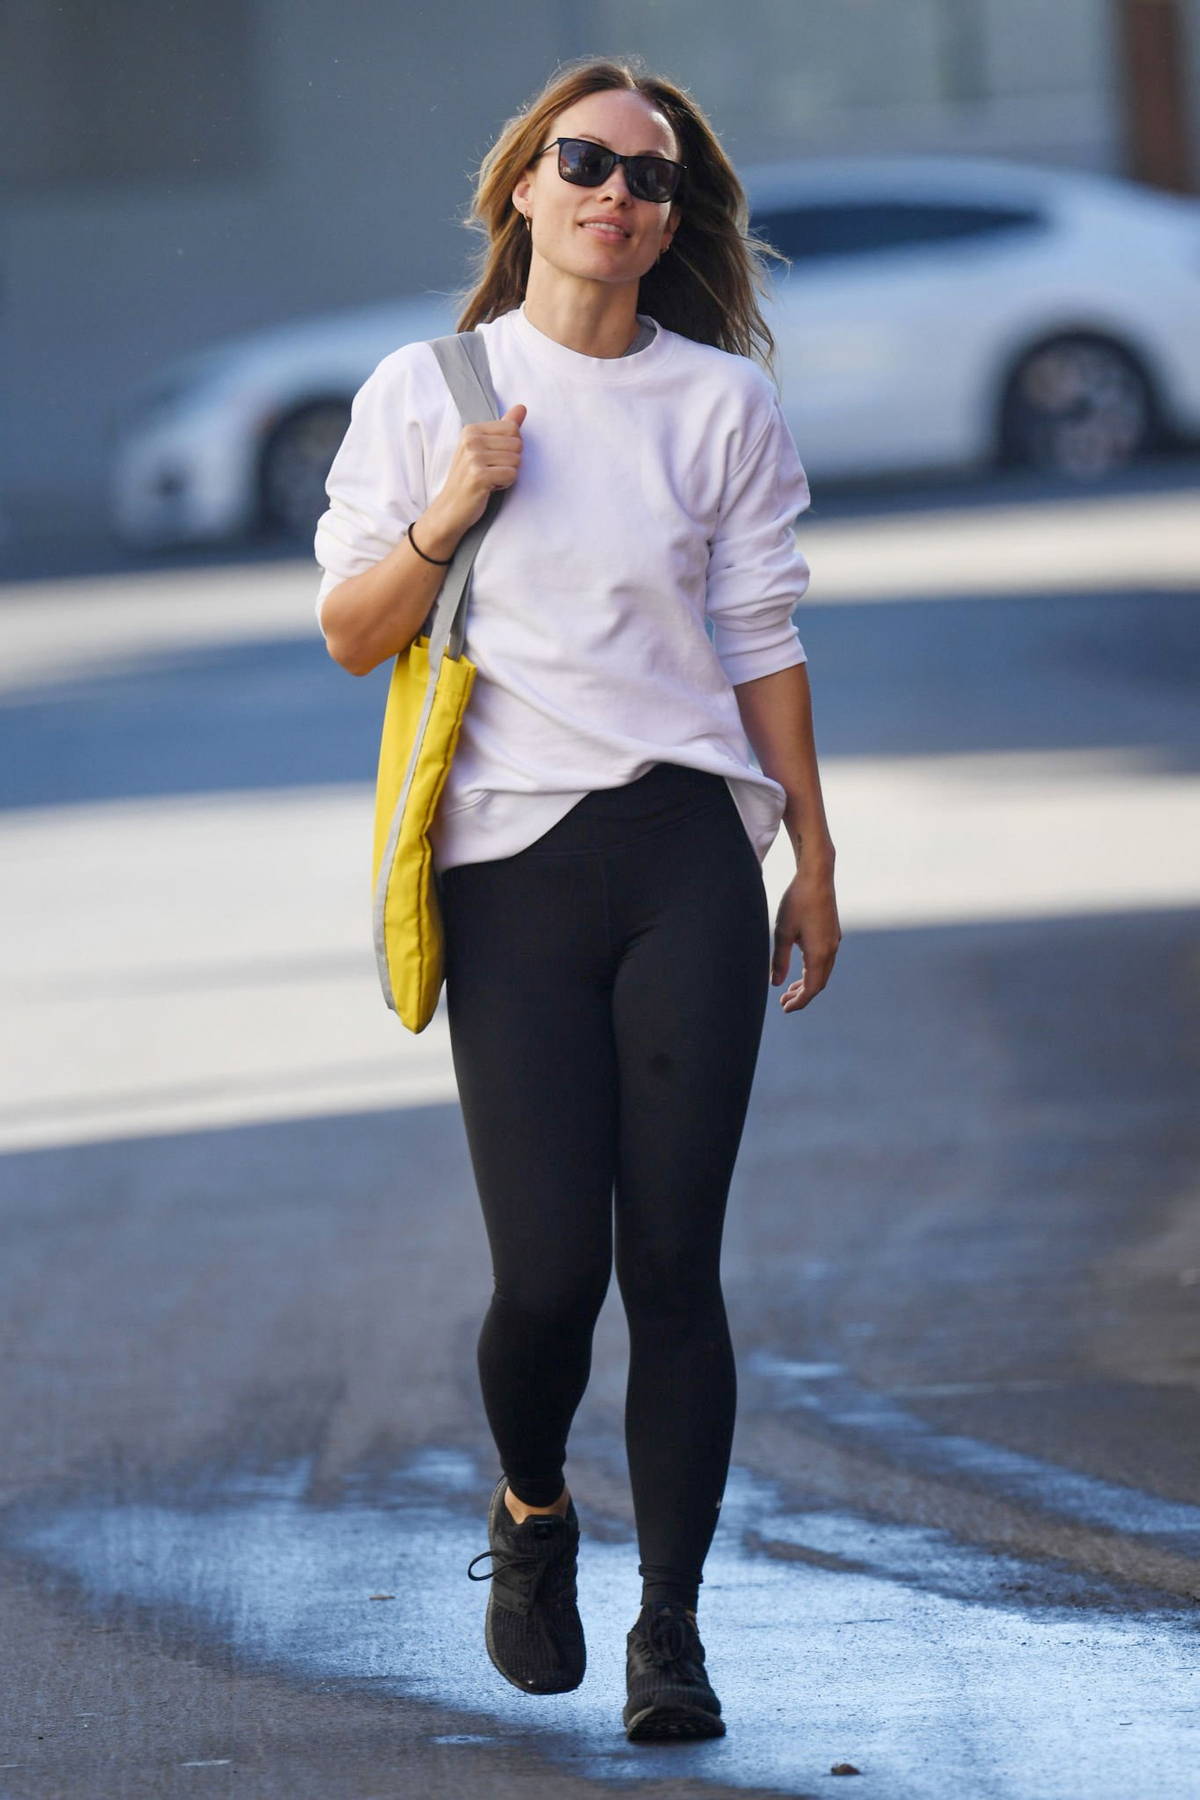 Olivia Wilde Spends Her Saturday Morning at the Gym: Photo 4886171, Olivia  Wilde Photos